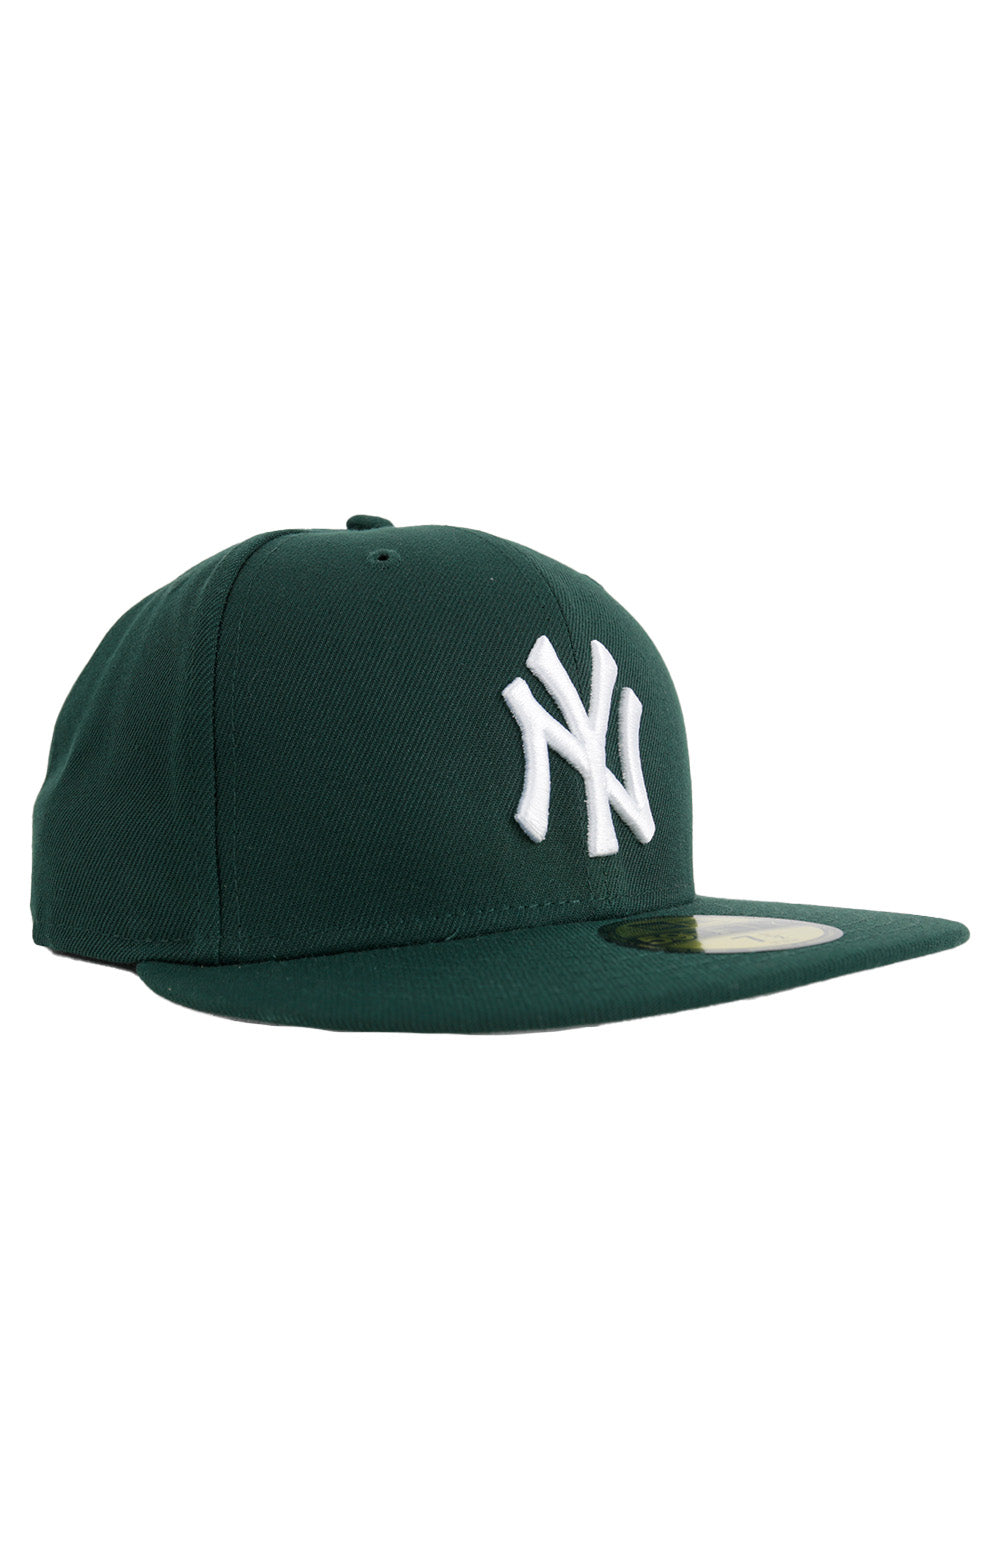 NY Yankees 59Fifty Fitted Hat - Dark Green